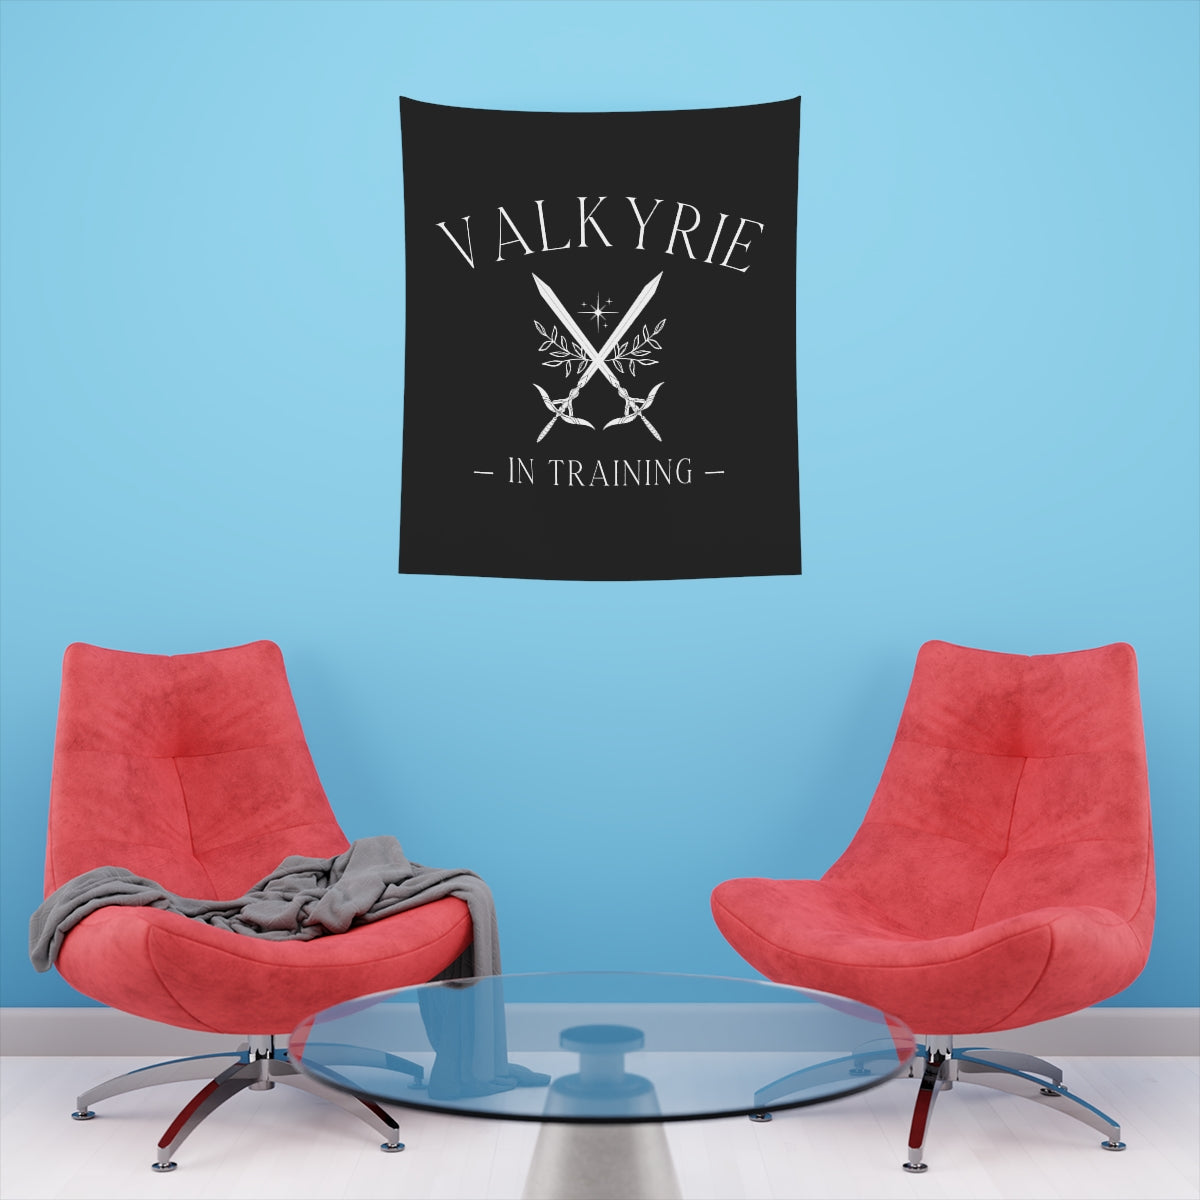 Valkyrie Wall Tapestry